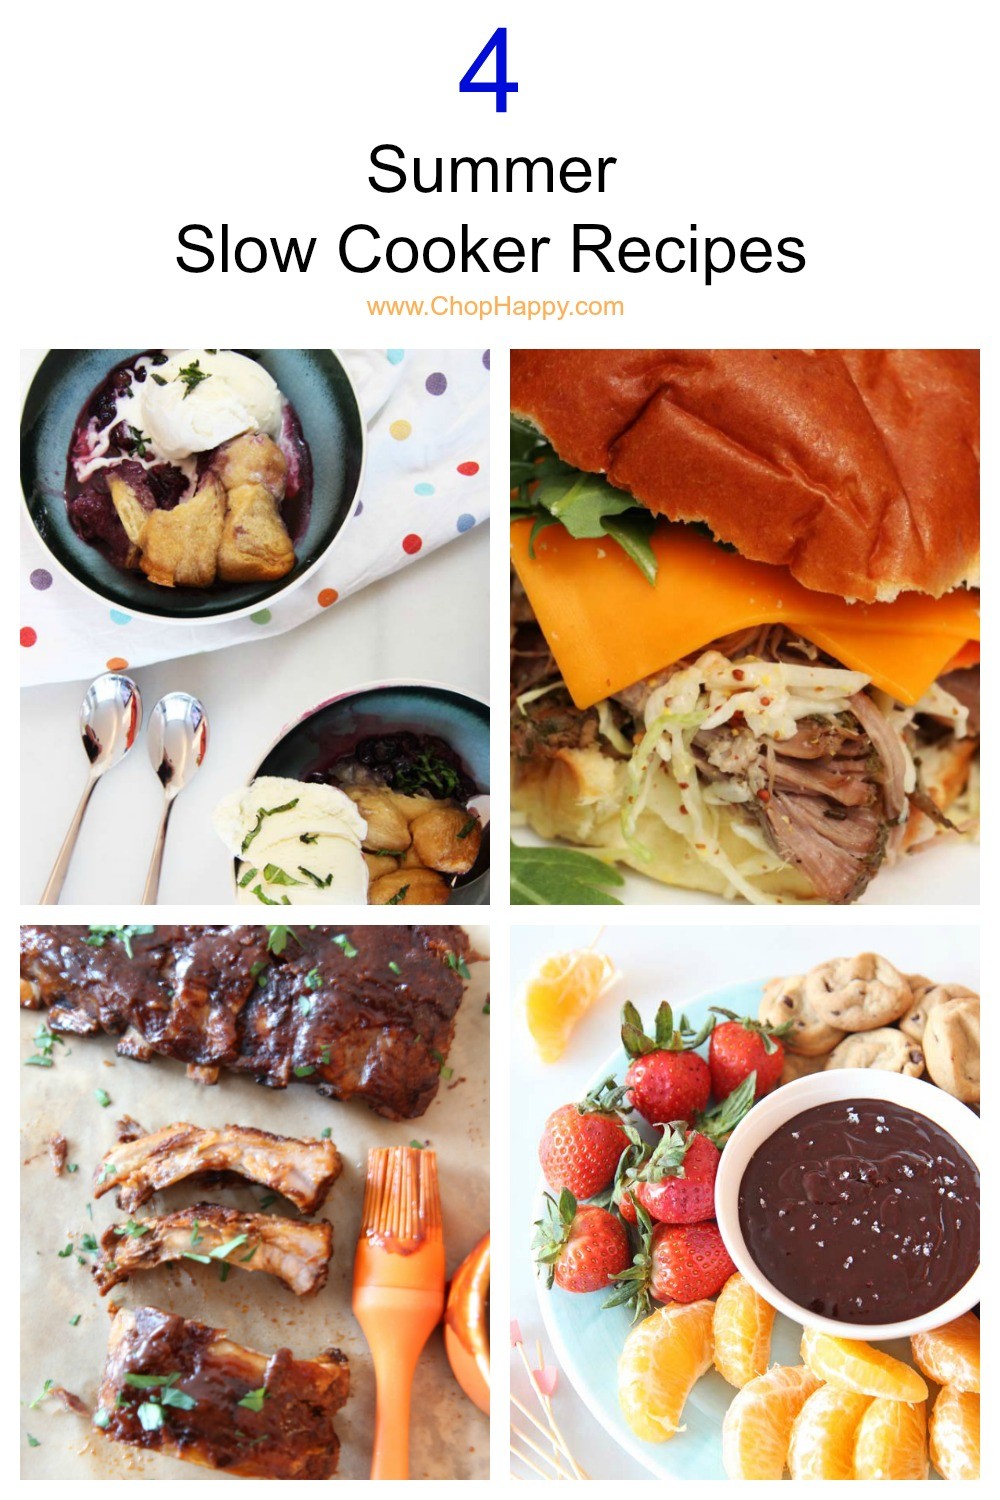 4 Summer Slow Cooker Recipes. Biscuit Berry Cobbler, Pulled Pork Sandwich, BBQ ribs, and Wine Fondue recipes. Happy Cooking! #summerrecipes #slowcookerrecipes